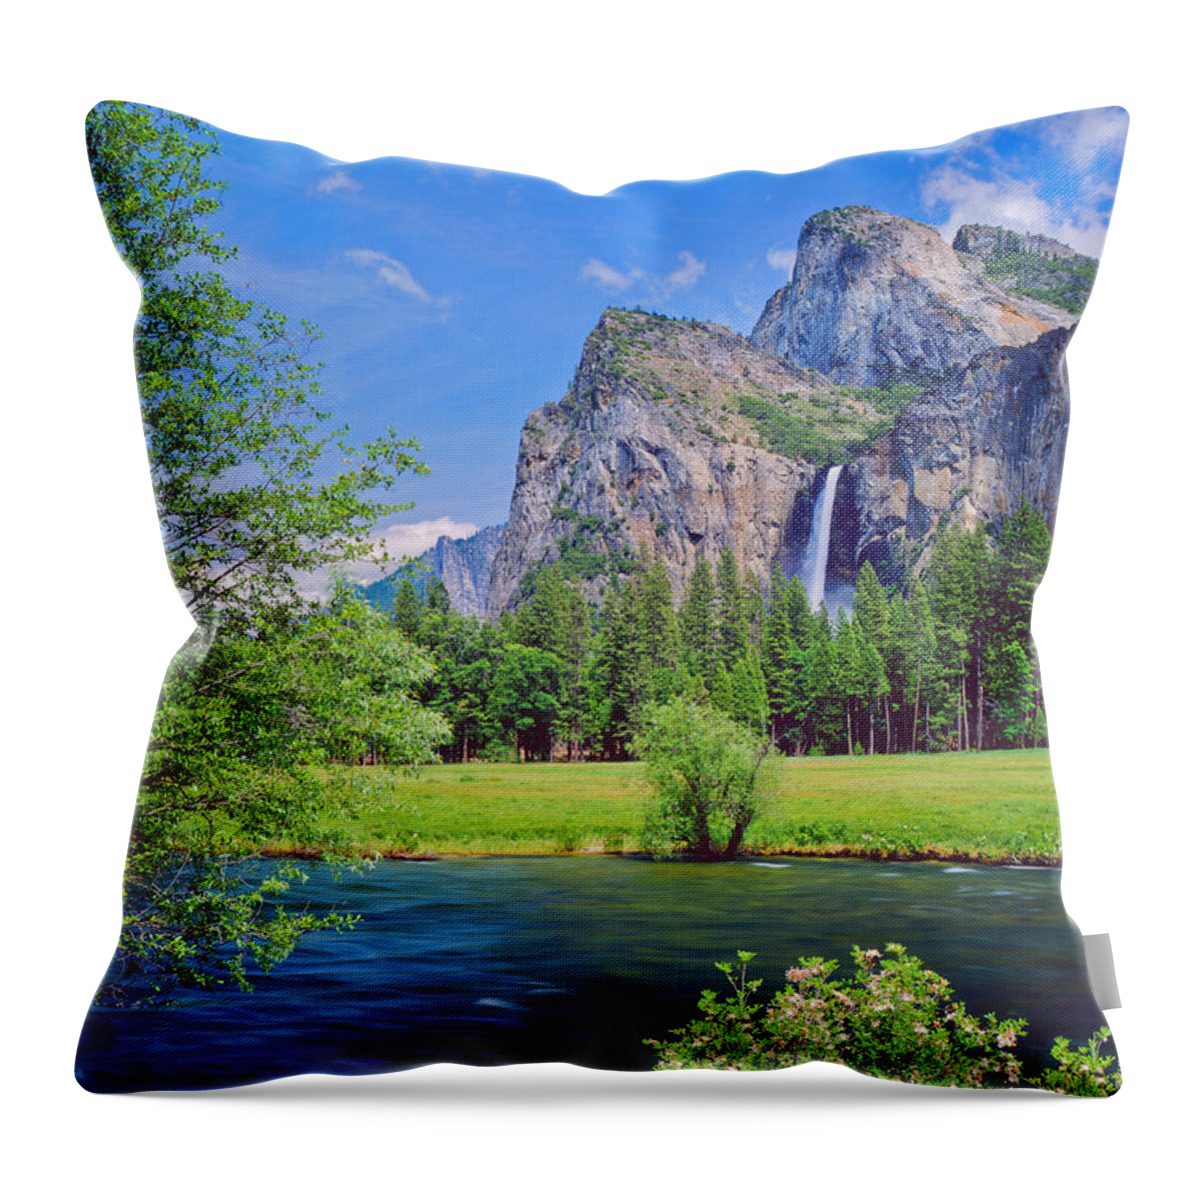 Scenics Throw Pillow featuring the photograph Lakeside View Of Yosemite National Park by Ron thomas